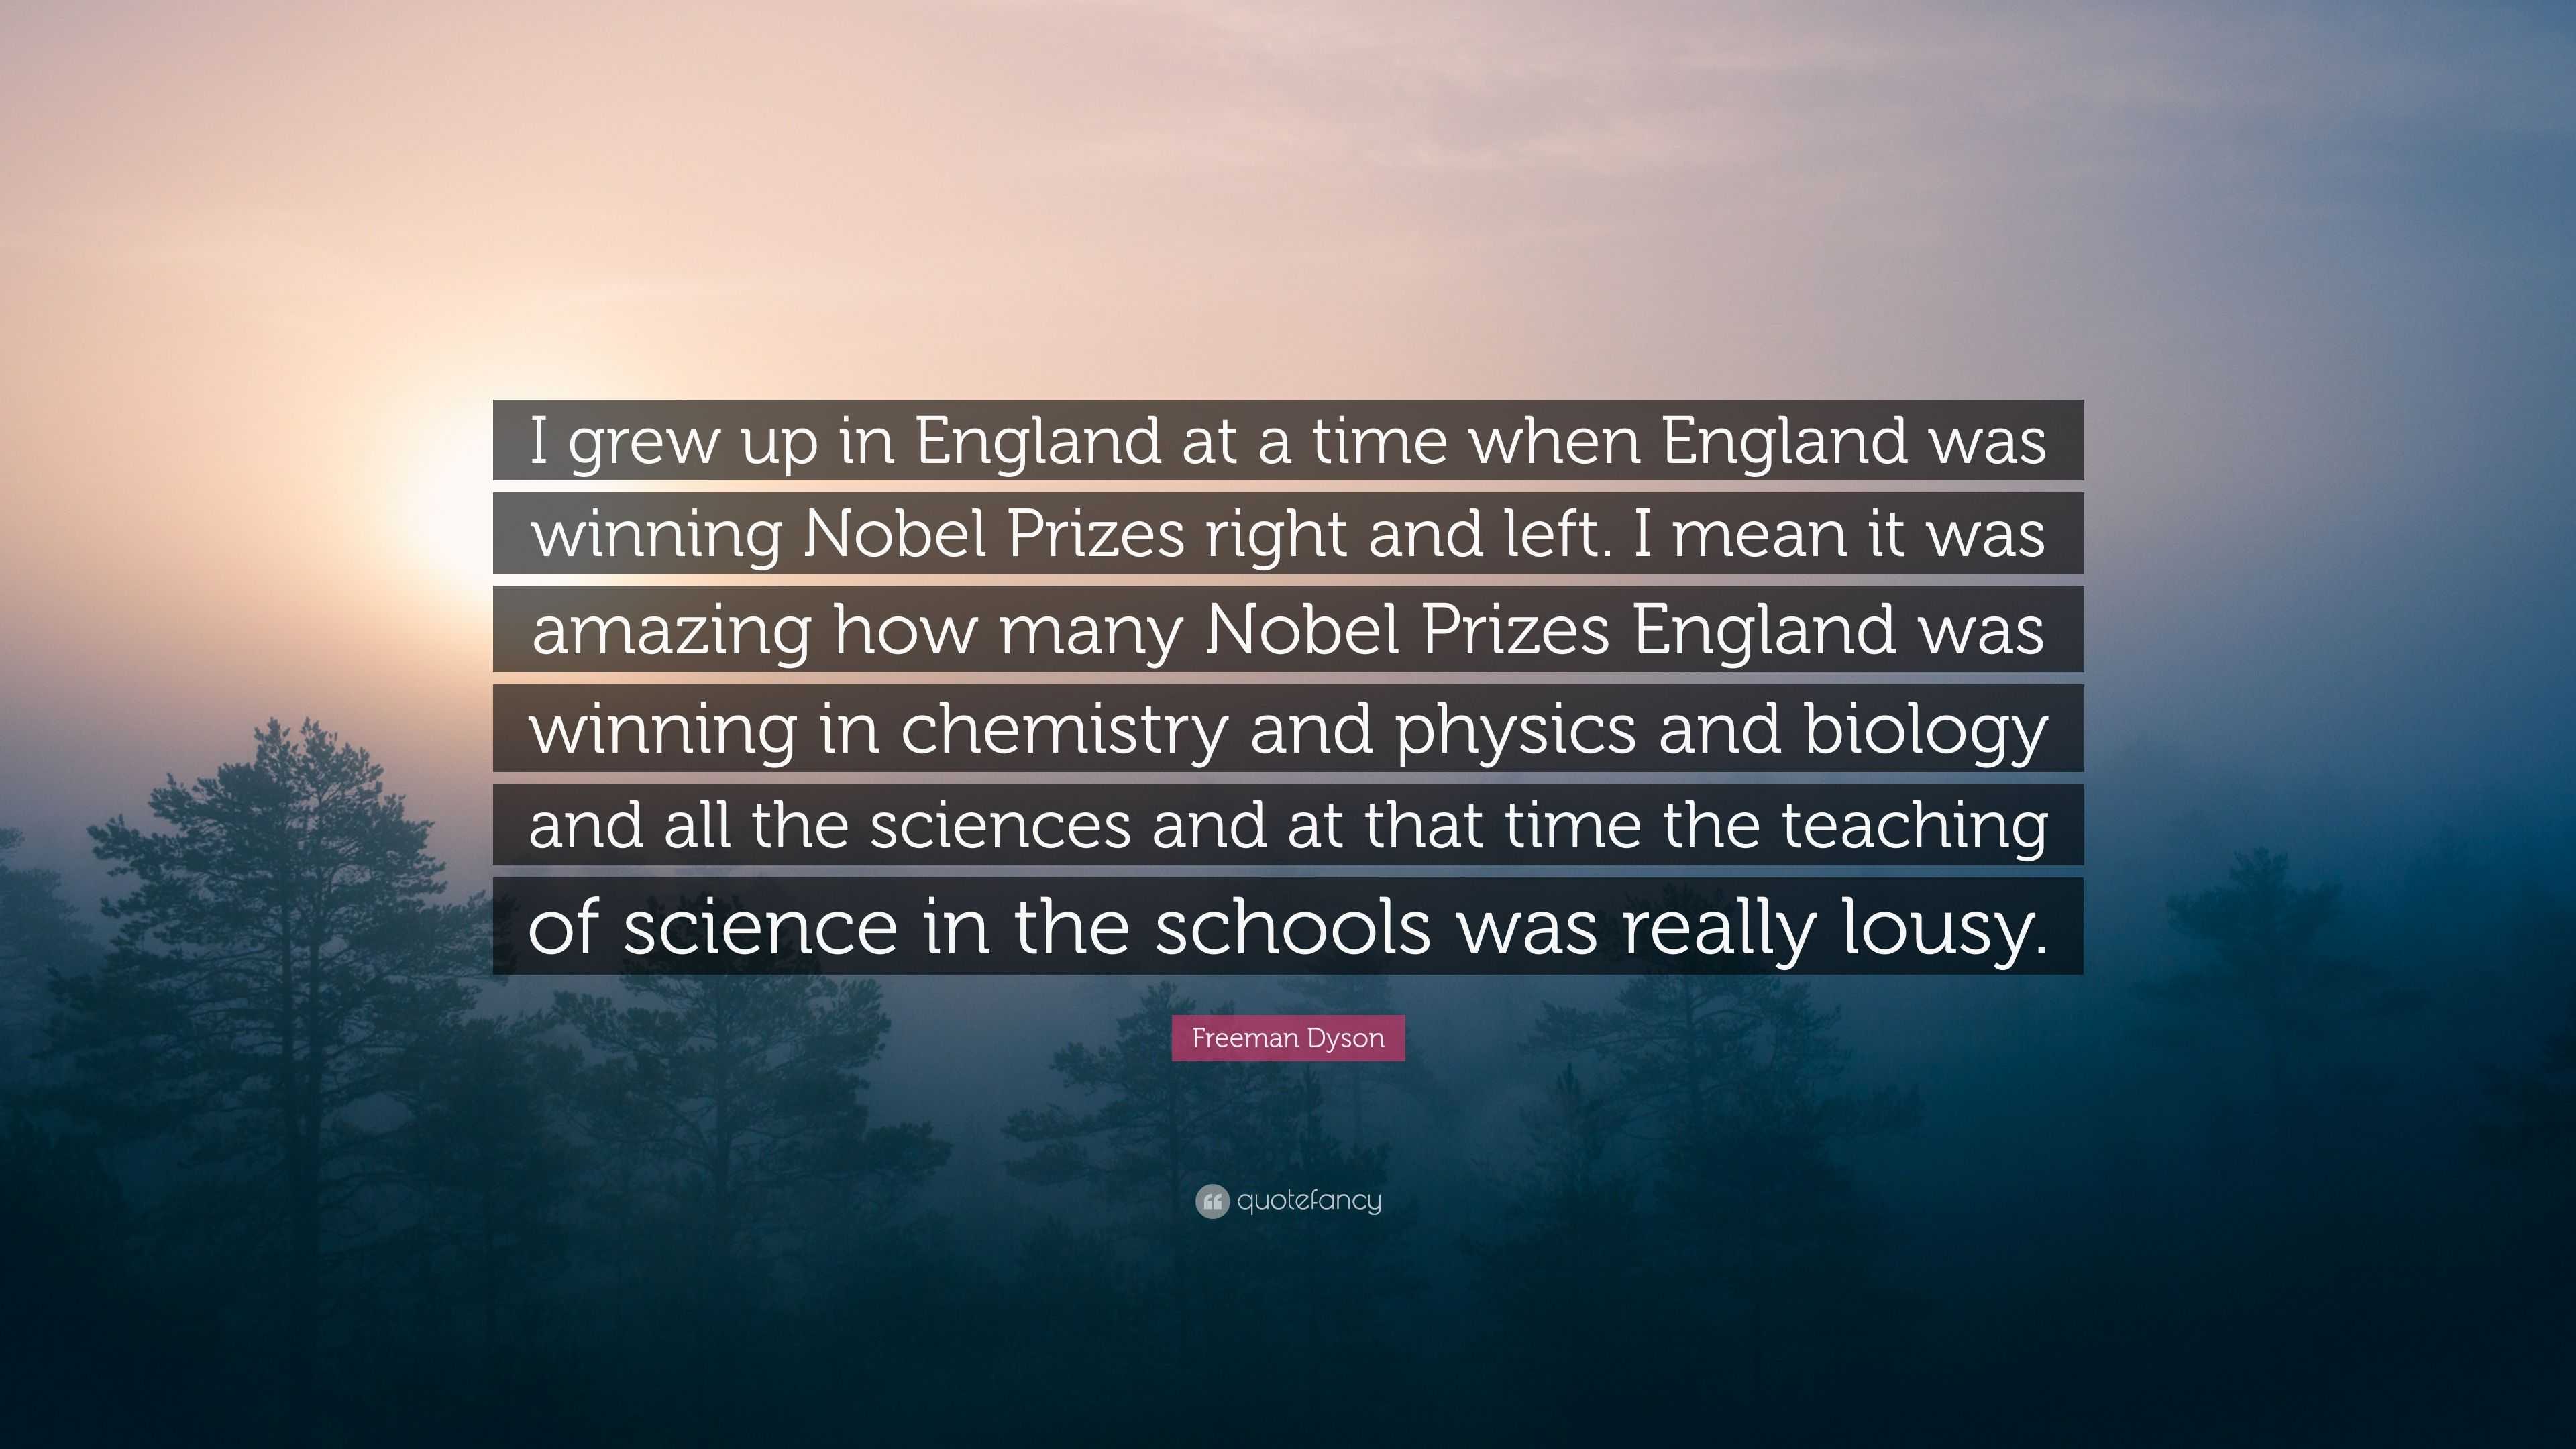 Freeman Dyson Quote: “I grew in England at a time when England was winning Nobel Prizes right and I mean it was amazing how Nobe...”